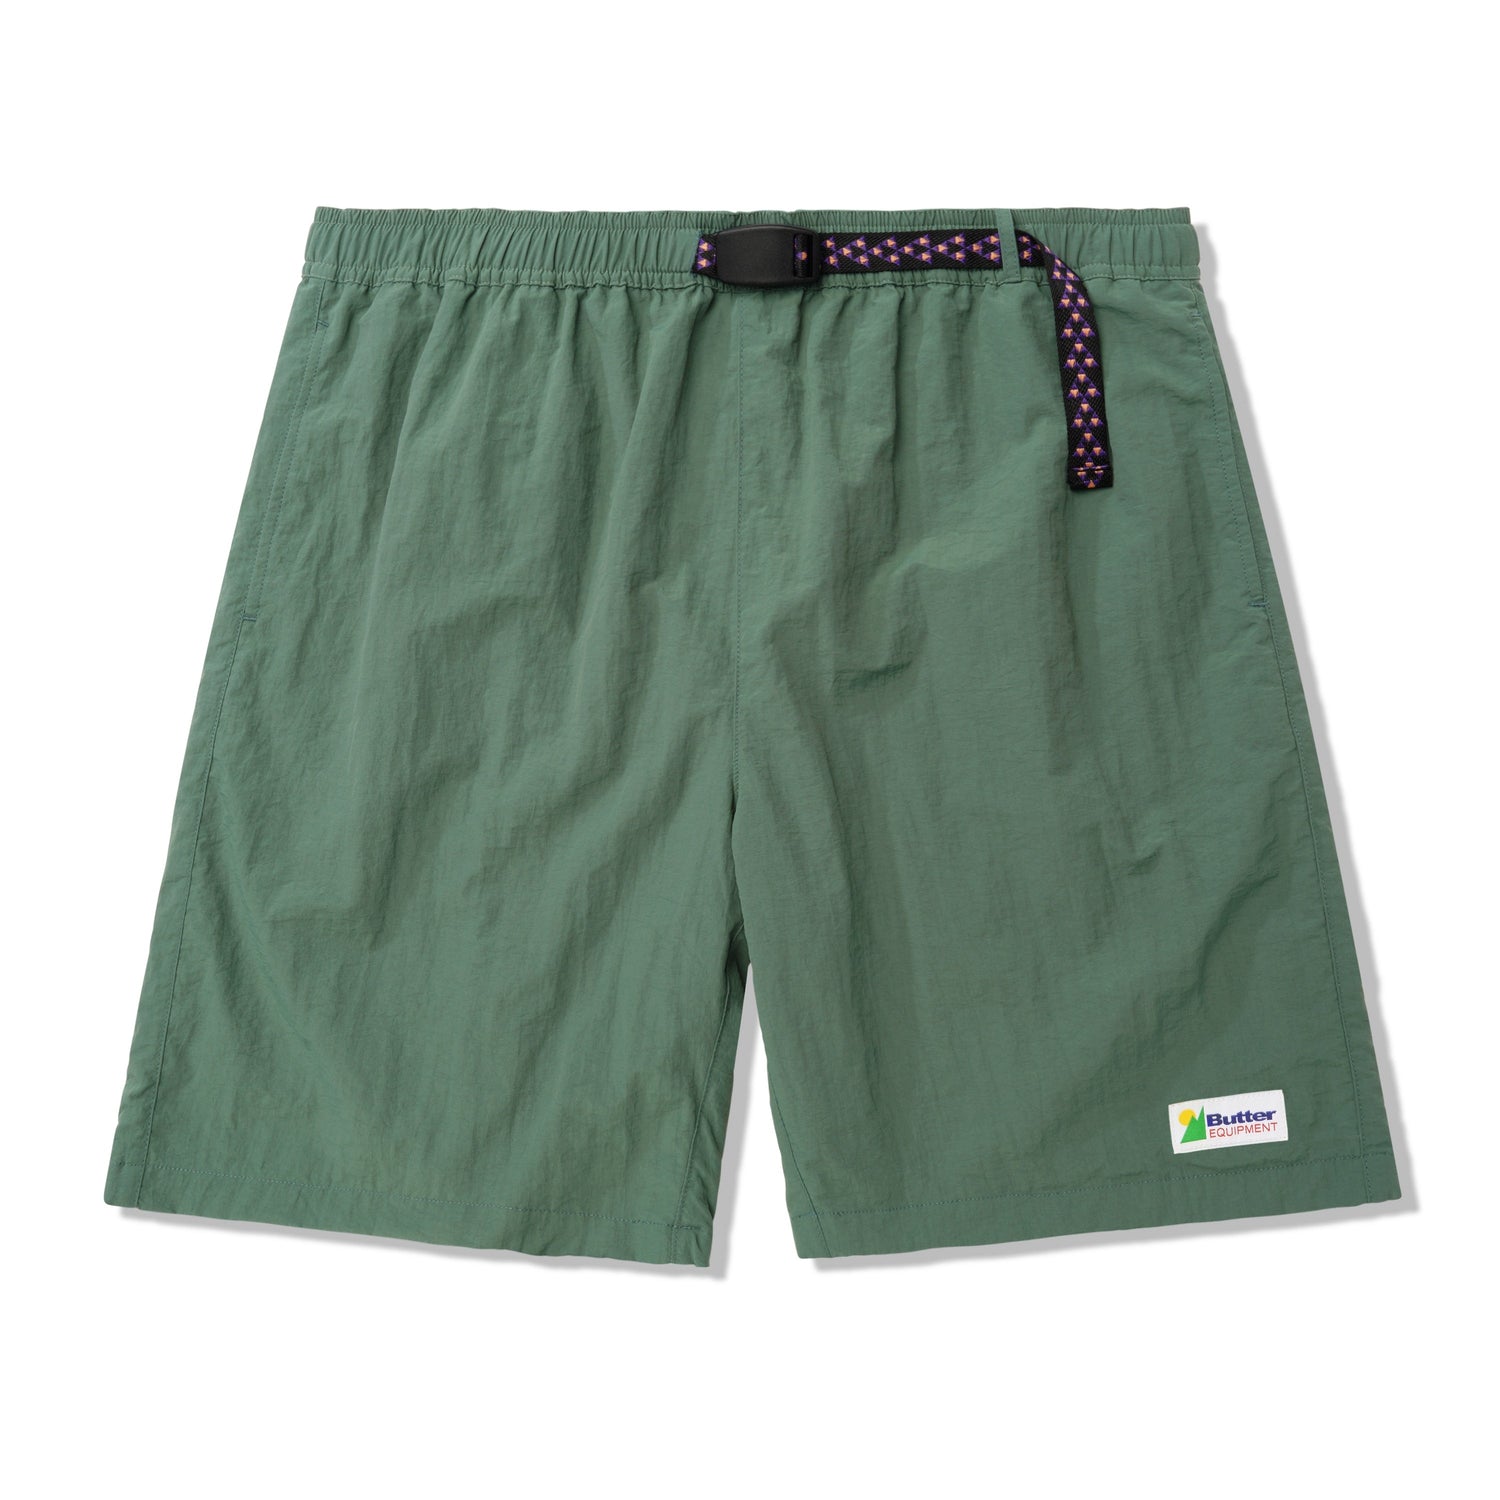 Equipment Shorts, Forest